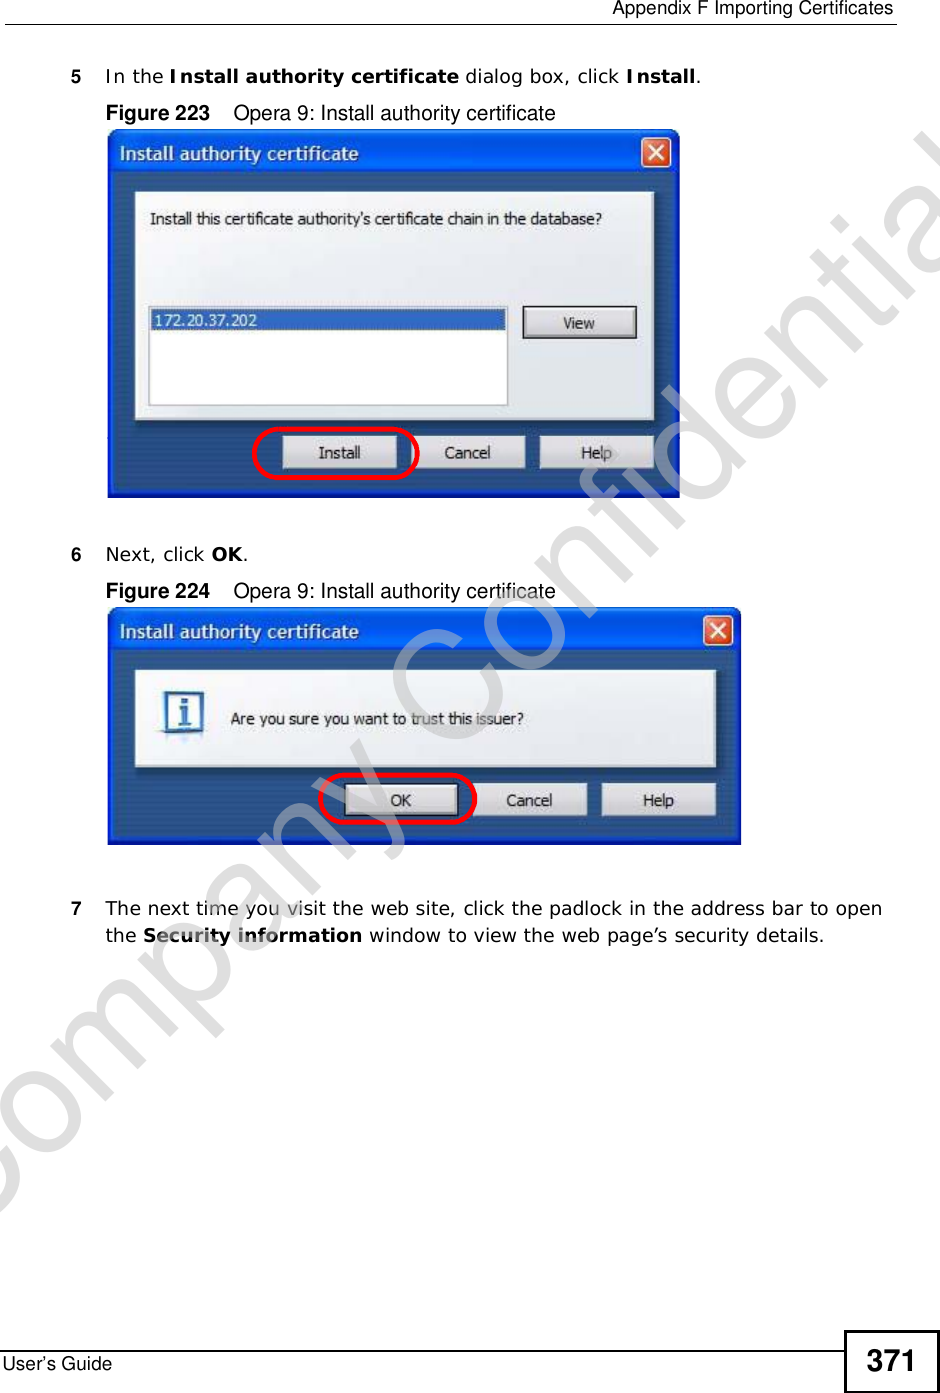  Appendix FImporting CertificatesUser’s Guide 3715In the Install authority certificate dialog box, click Install.Figure 223    Opera 9: Install authority certificate6Next, click OK.Figure 224    Opera 9: Install authority certificate7The next time you visit the web site, click the padlock in the address bar to open the Security information window to view the web page’s security details.Company Confidential